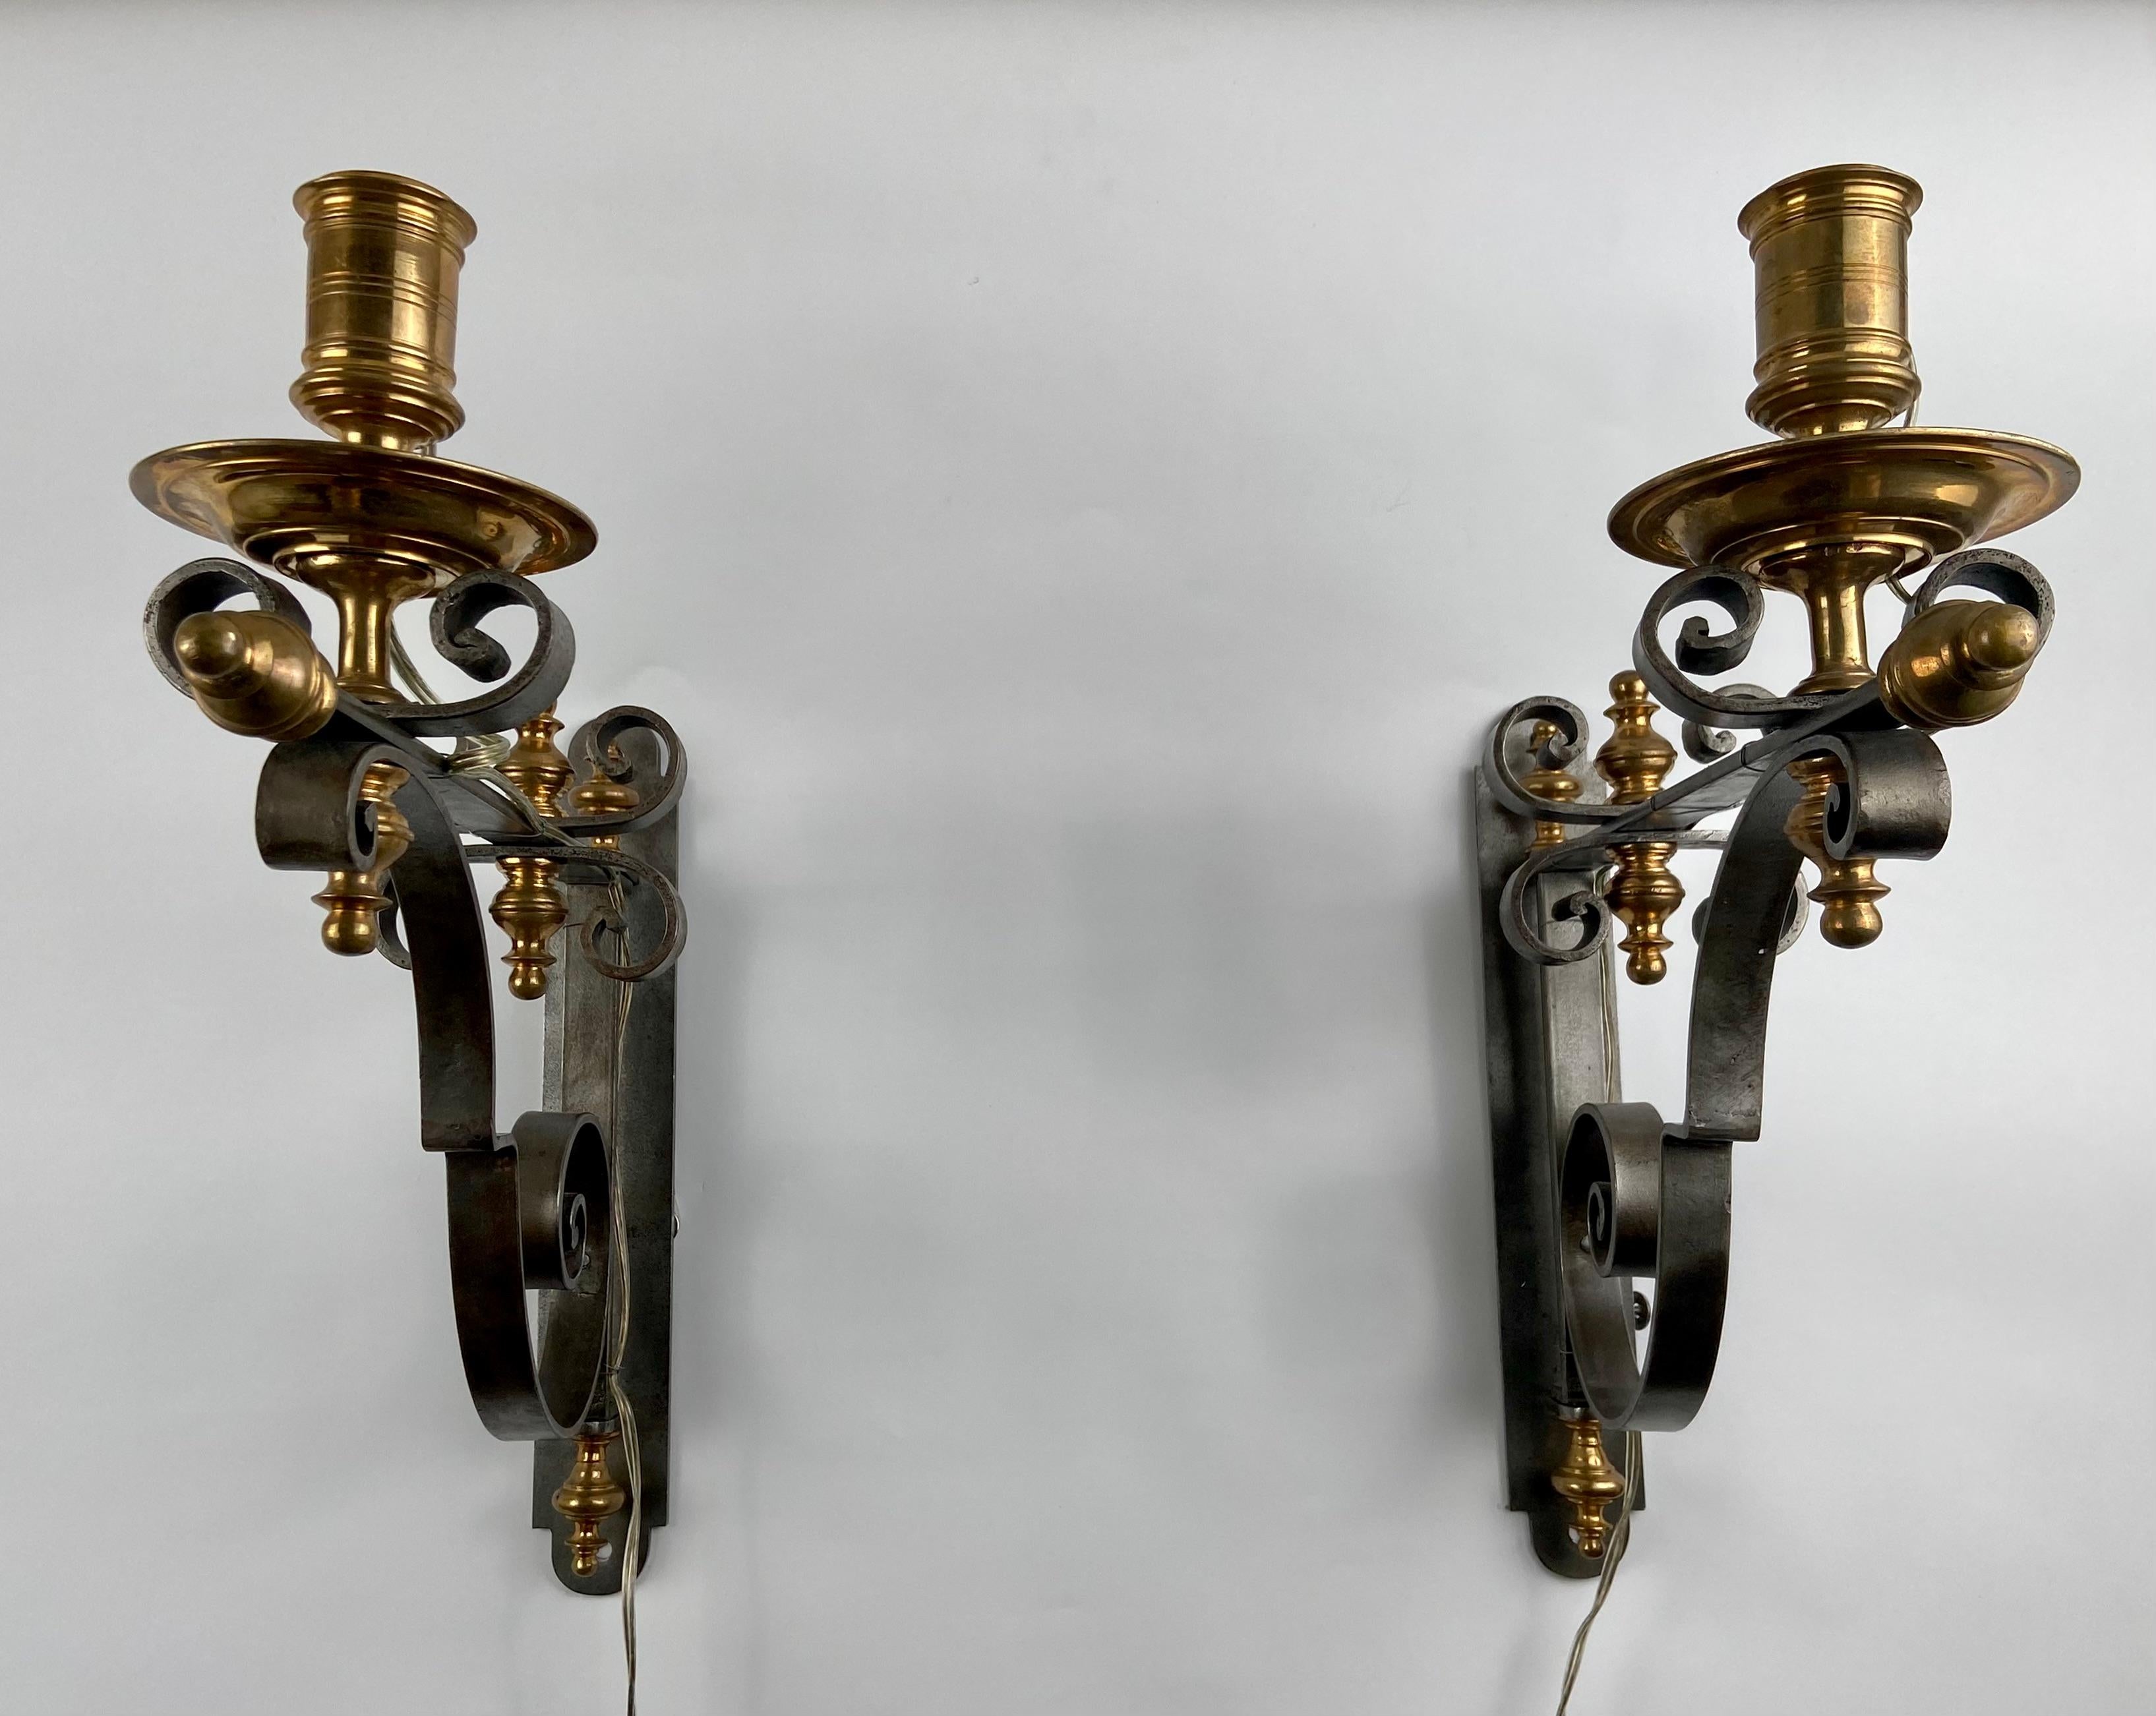 A pair of forged scones in steel and bronze. Italy, circa 1970.
They are electrified but can also used with candles.
They can be moved from left to right. No lampshades. 